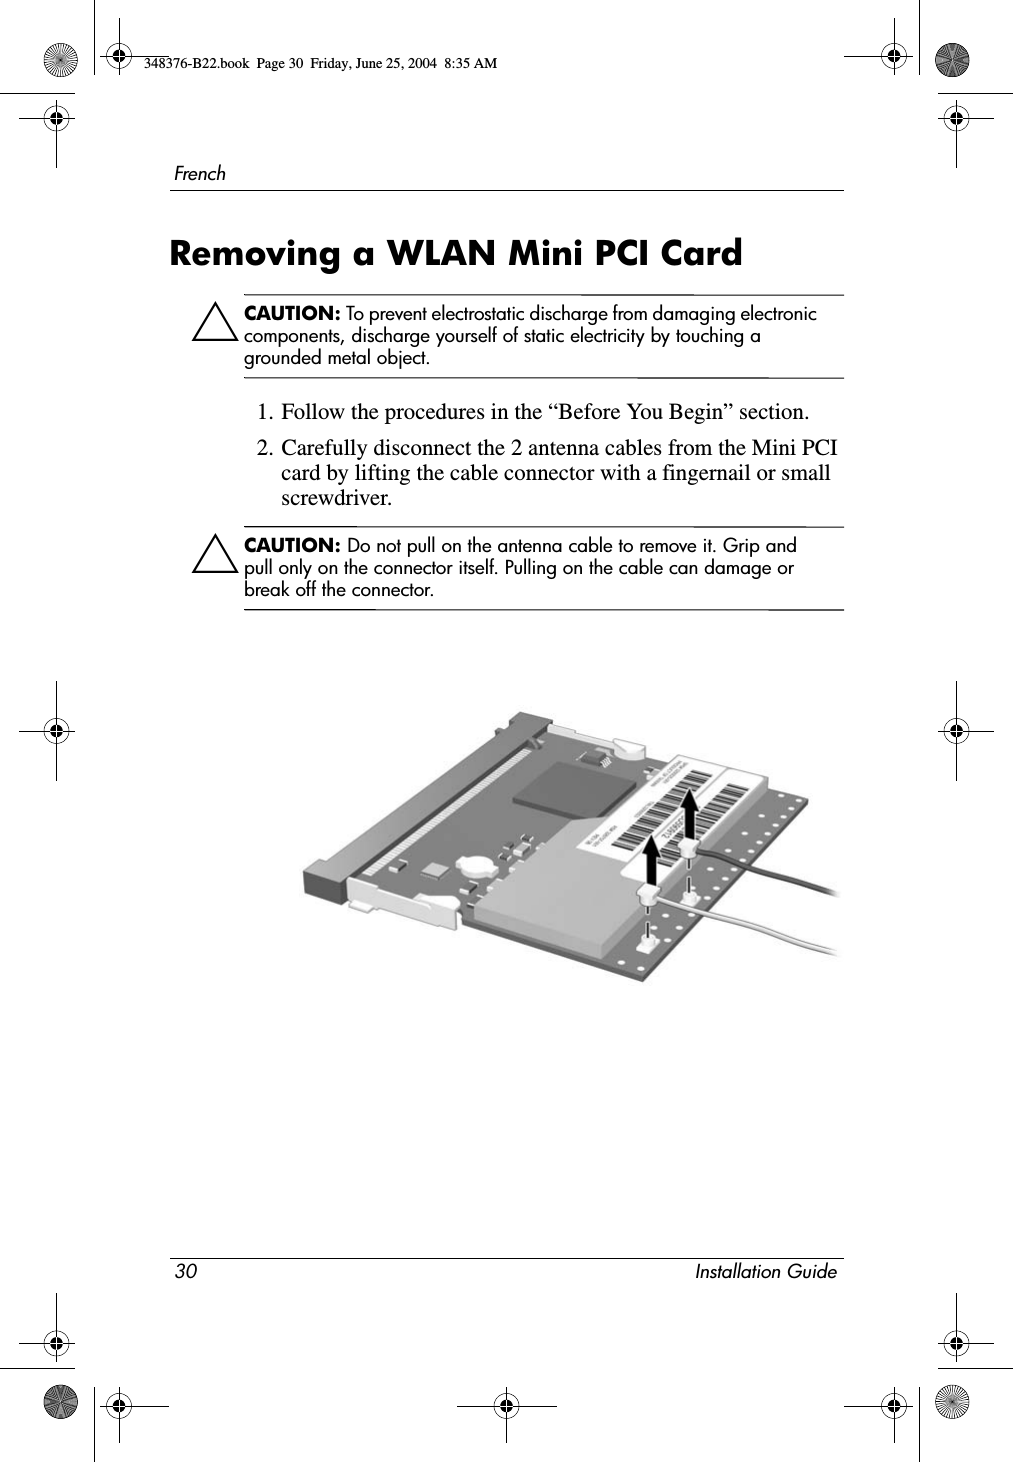 30 Installation GuideFrenchRemoving a WLAN Mini PCI CardÄCAUTION: To prevent electrostatic discharge from damaging electronic components, discharge yourself of static electricity by touching a grounded metal object.1. Follow the procedures in the “Before You Begin” section.2. Carefully disconnect the 2 antenna cables from the Mini PCI card by lifting the cable connector with a fingernail or small screwdriver.ÄCAUTION: Do not pull on the antenna cable to remove it. Grip and pull only on the connector itself. Pulling on the cable can damage or break off the connector.348376-B22.book  Page 30  Friday, June 25, 2004  8:35 AM